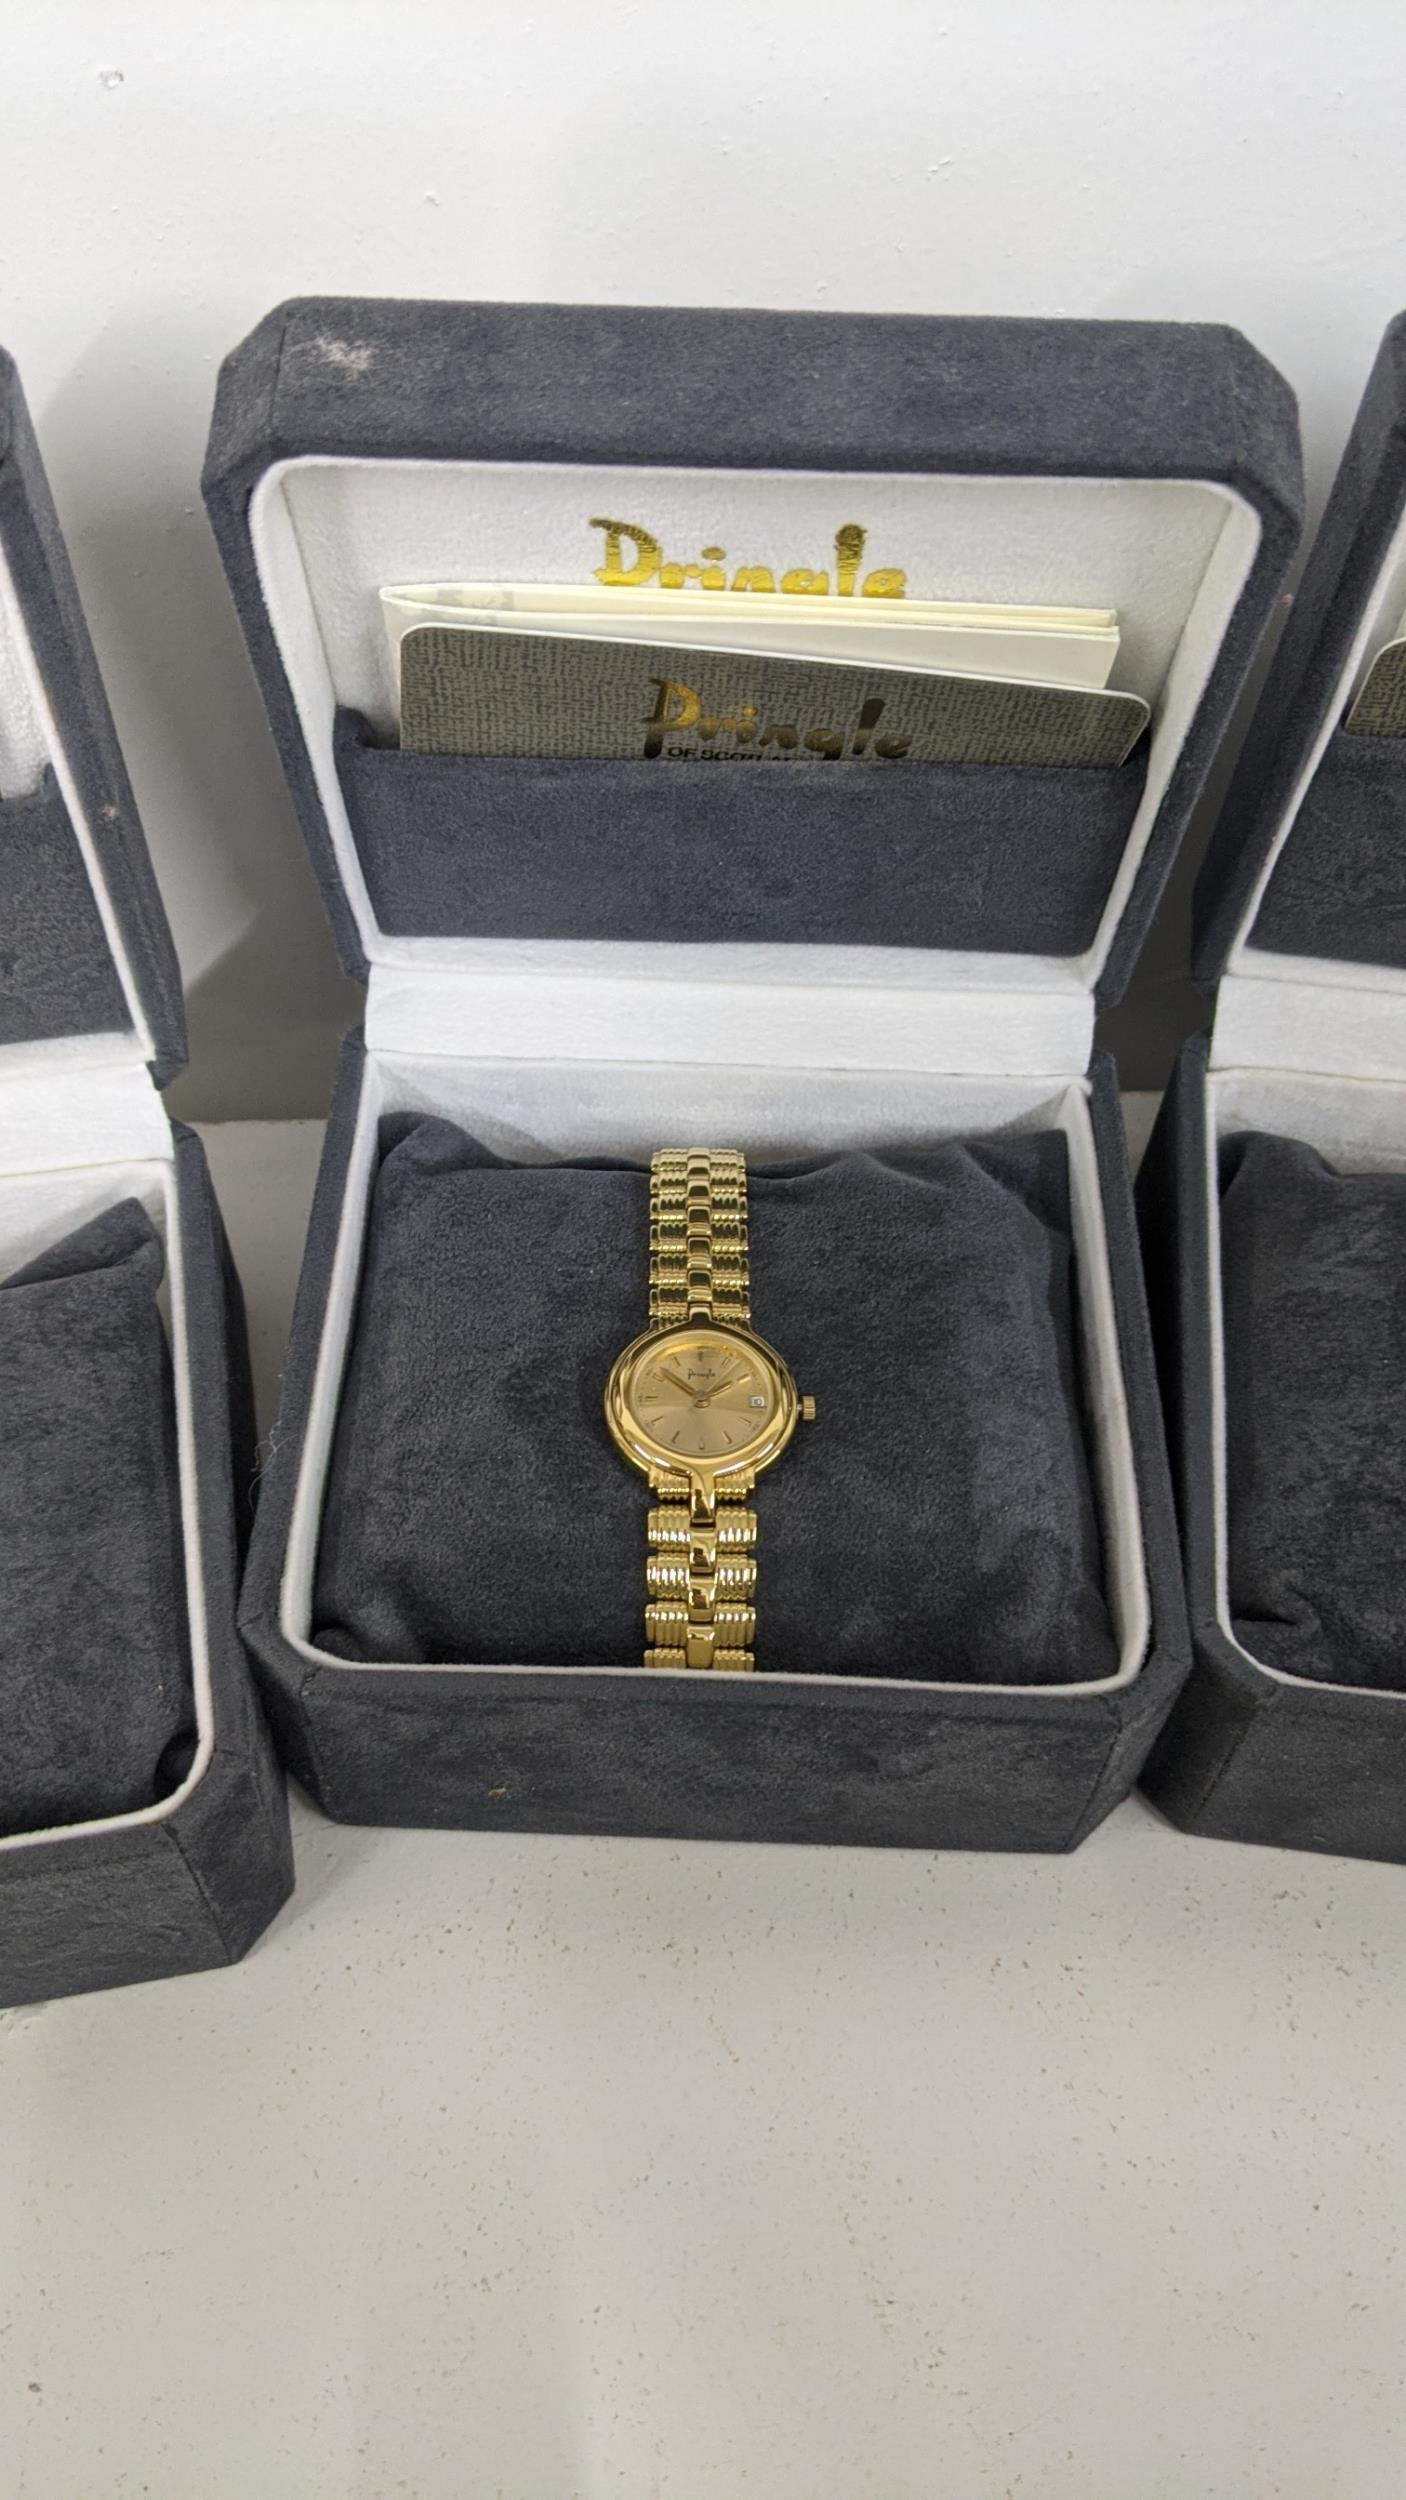 Ten ladies gold plated Pringle wrist watches five having white Quartz faces and five having gold - Image 6 of 8